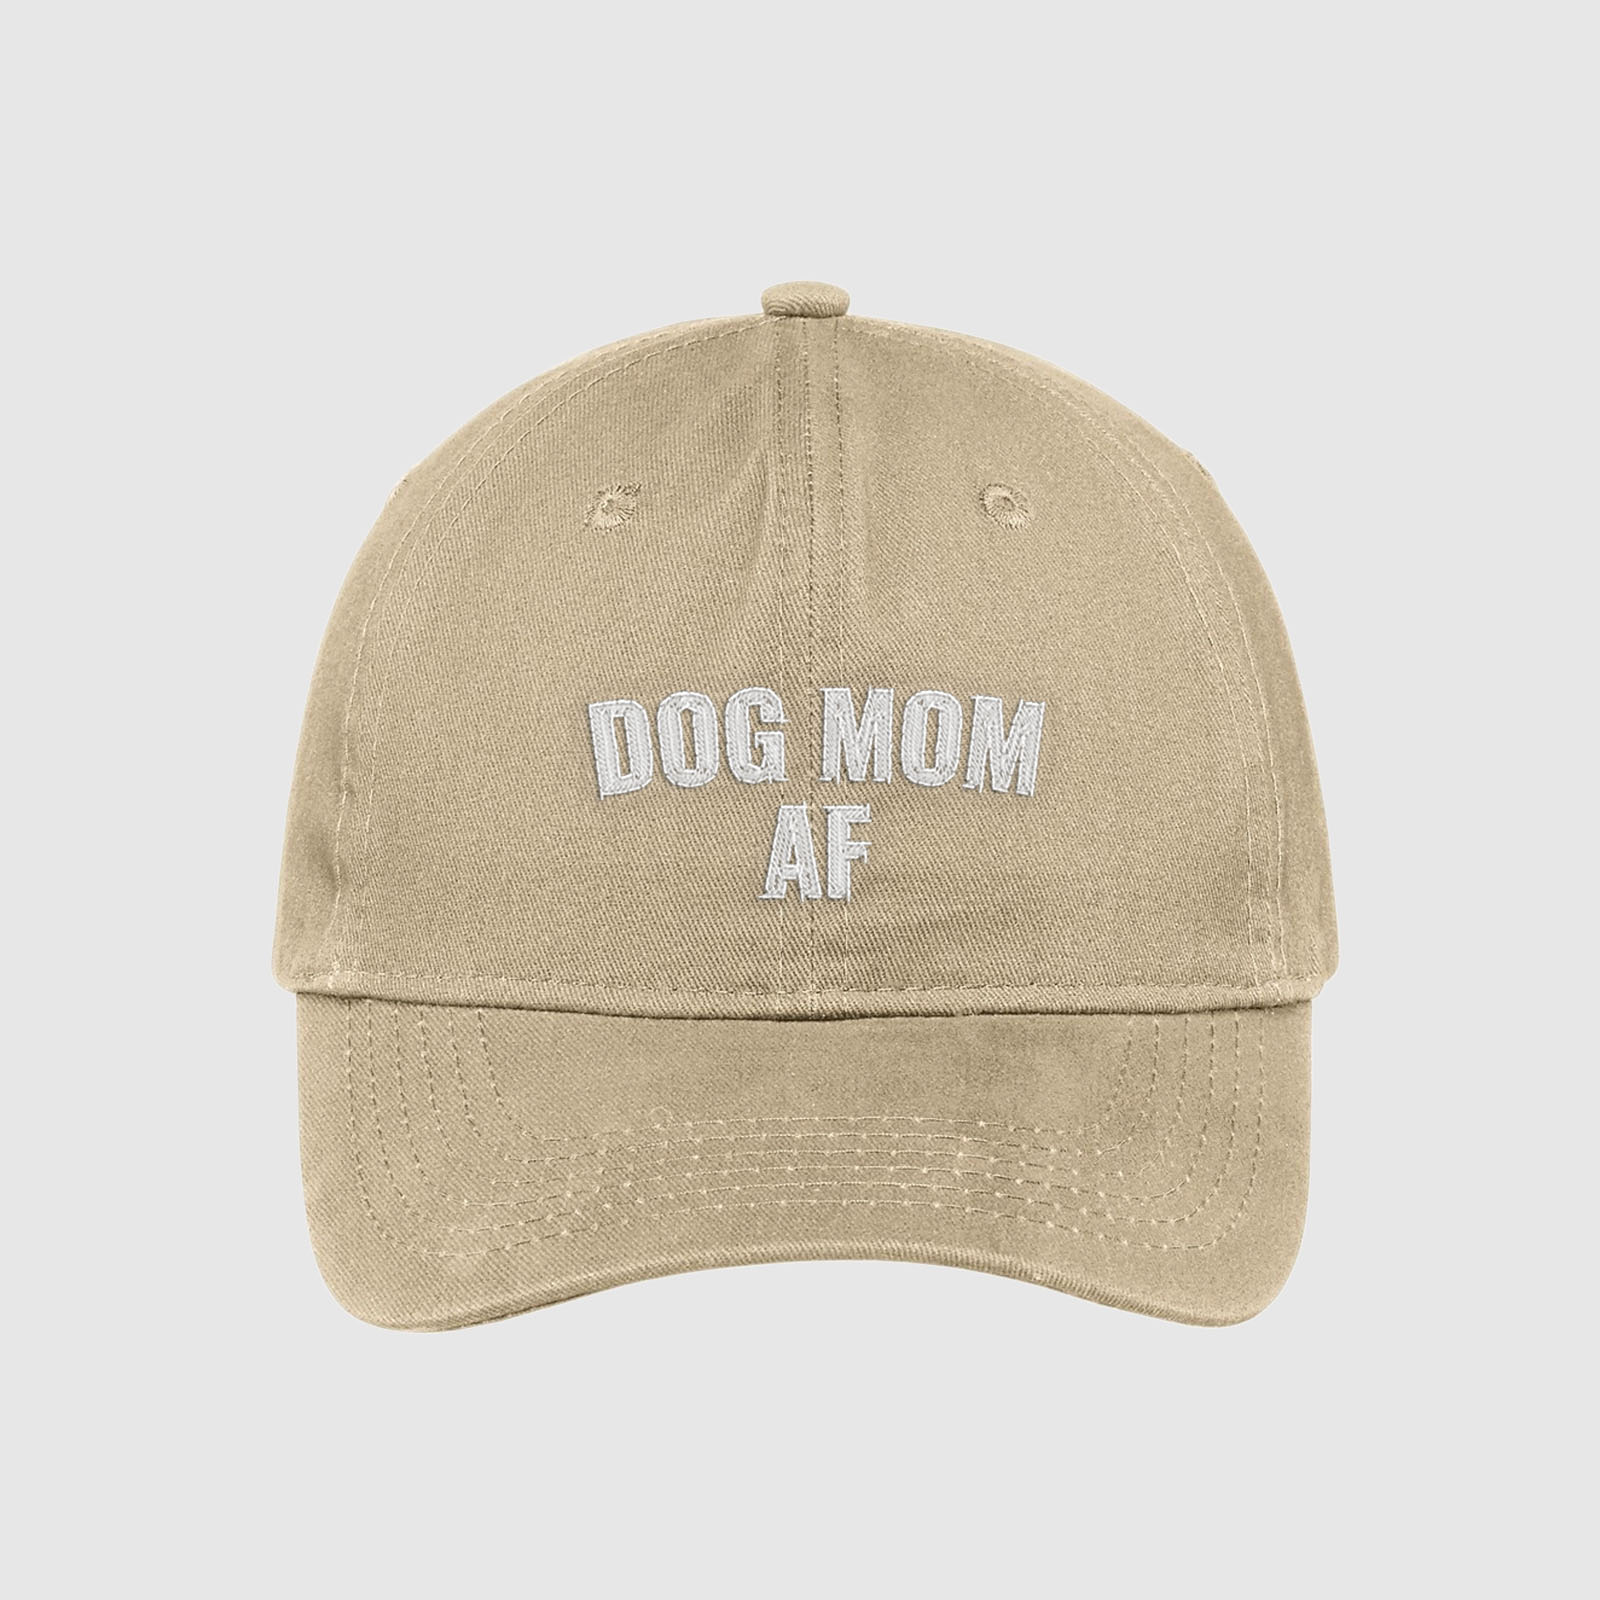 Tan Dog Mom AF Hat embroidered with white text.